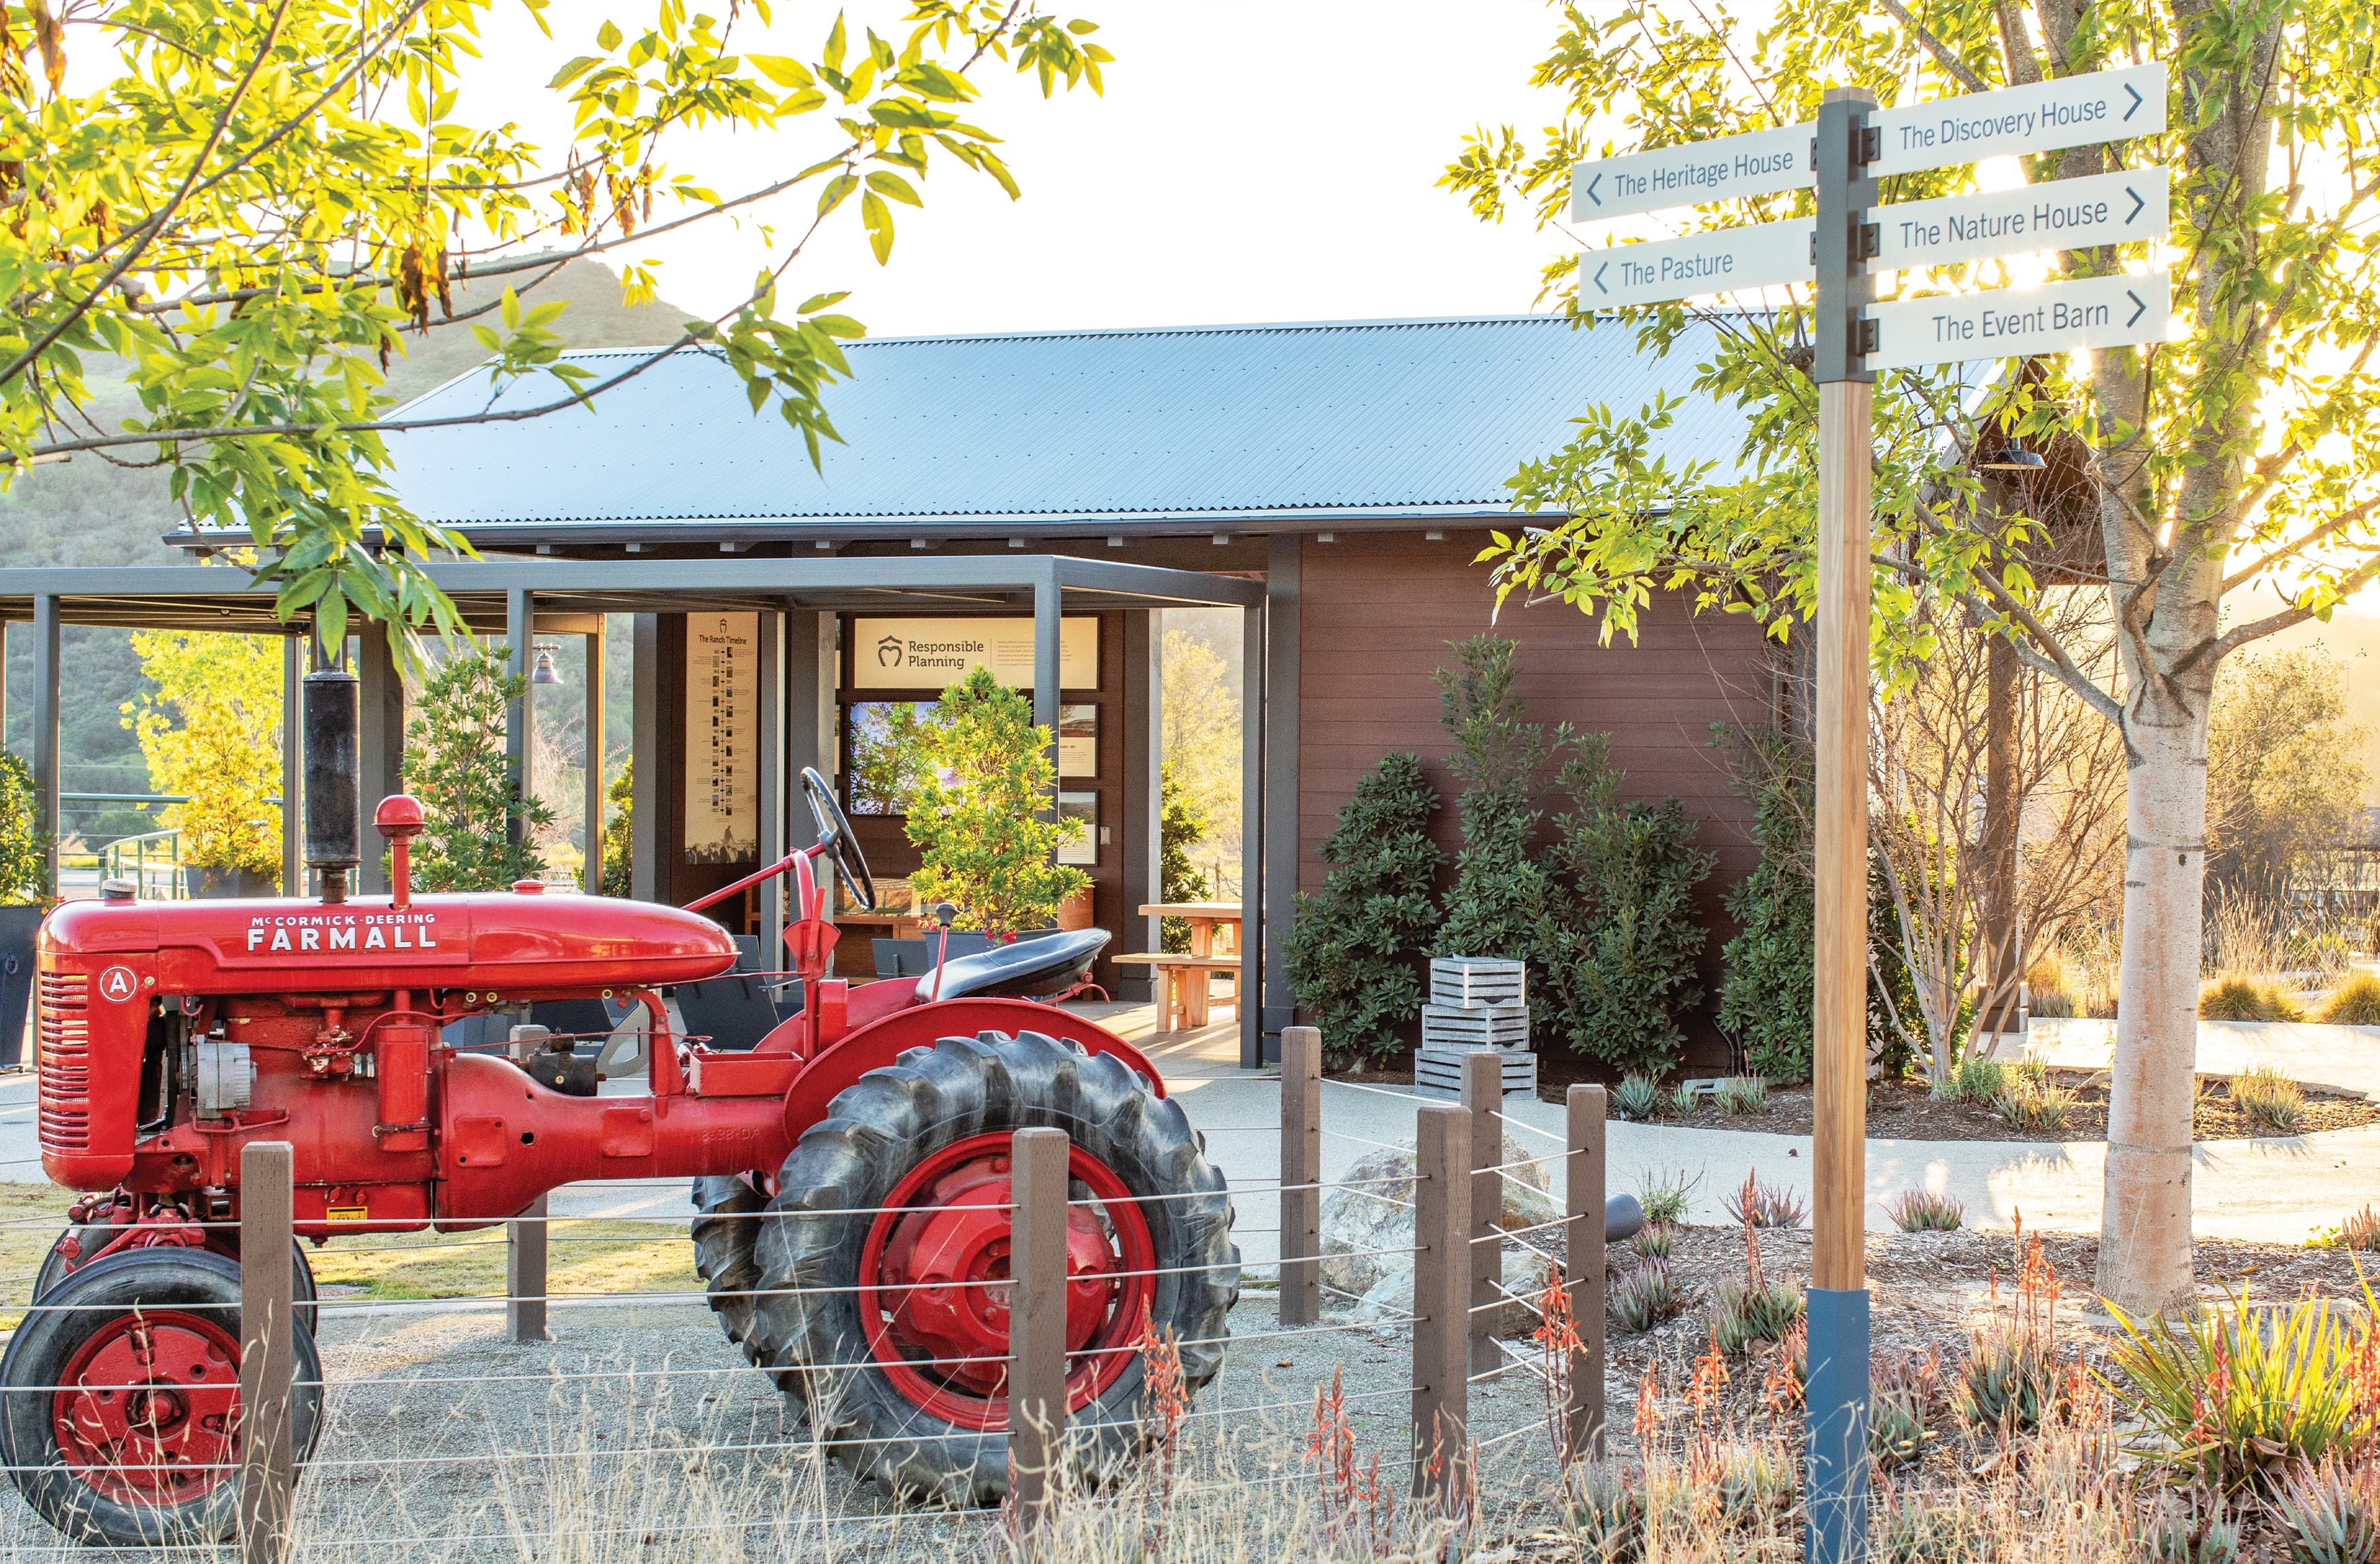 Image of tractor at Ranch Camp at Rancho Mission Viejo with directional flag sign in a clean, modern sign and typeface. Modern barn is seen in the background with Responsible Planning. ,